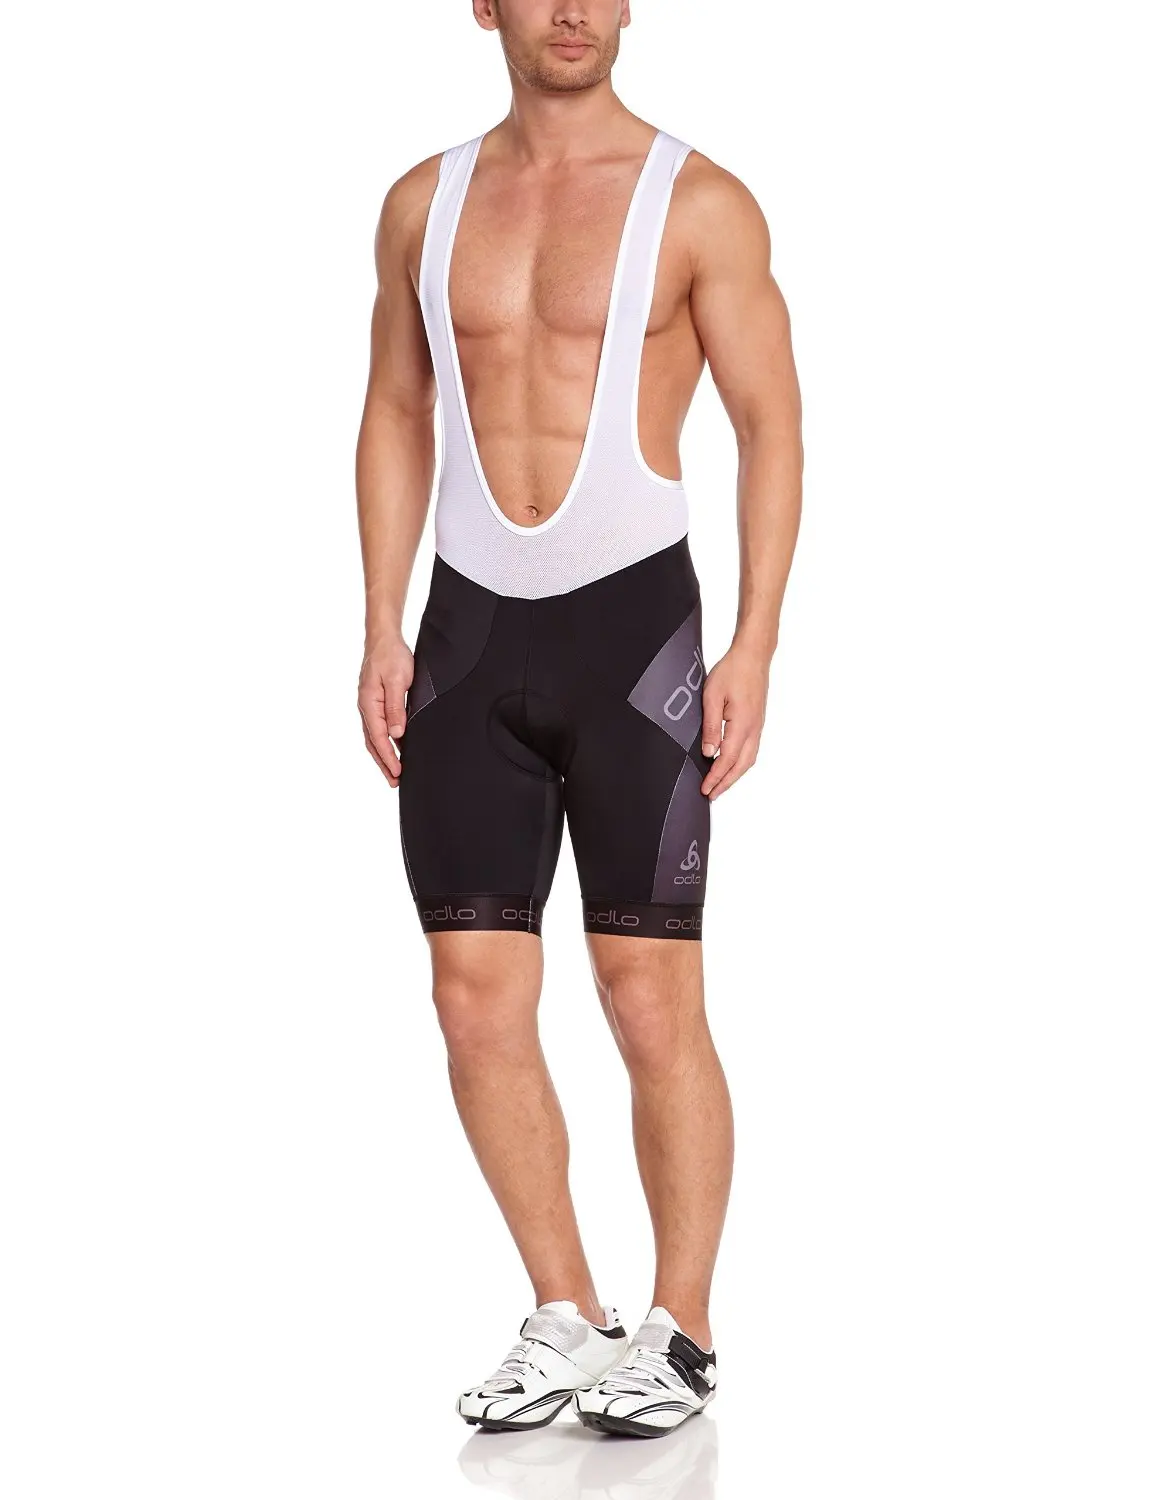 bike shorts with suspenders